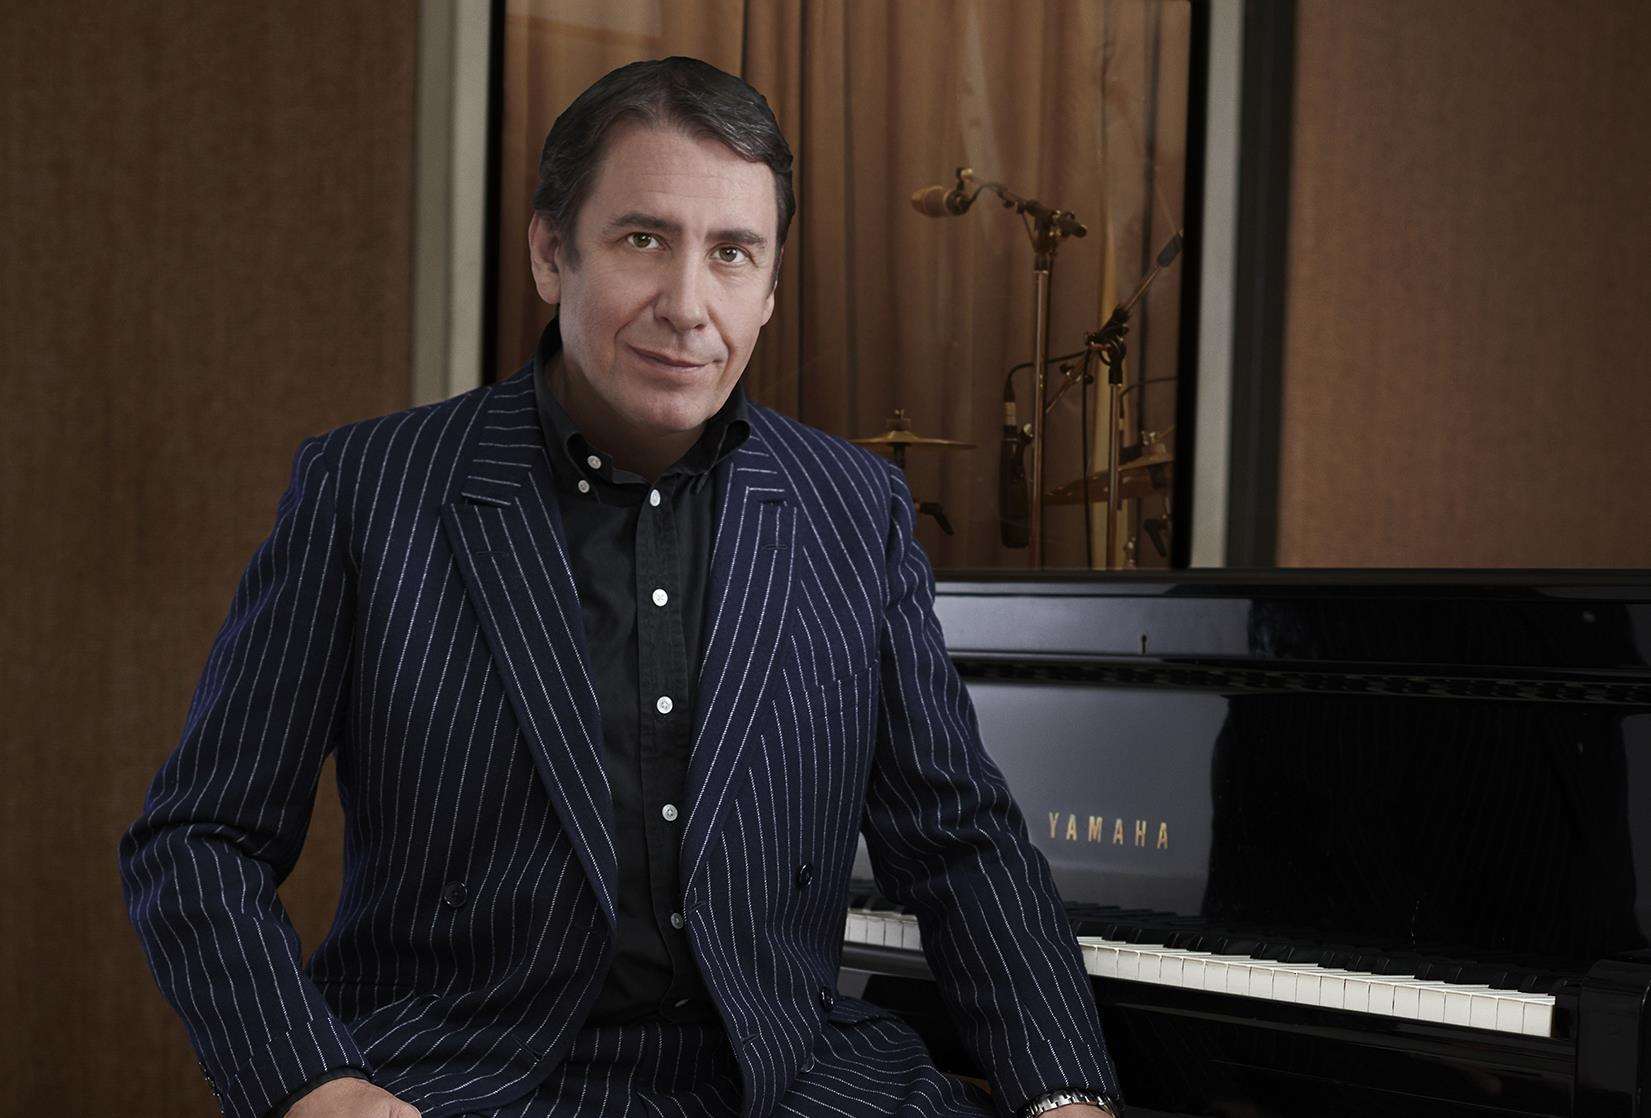 Jools Holland will be shooting his famous variety show this week